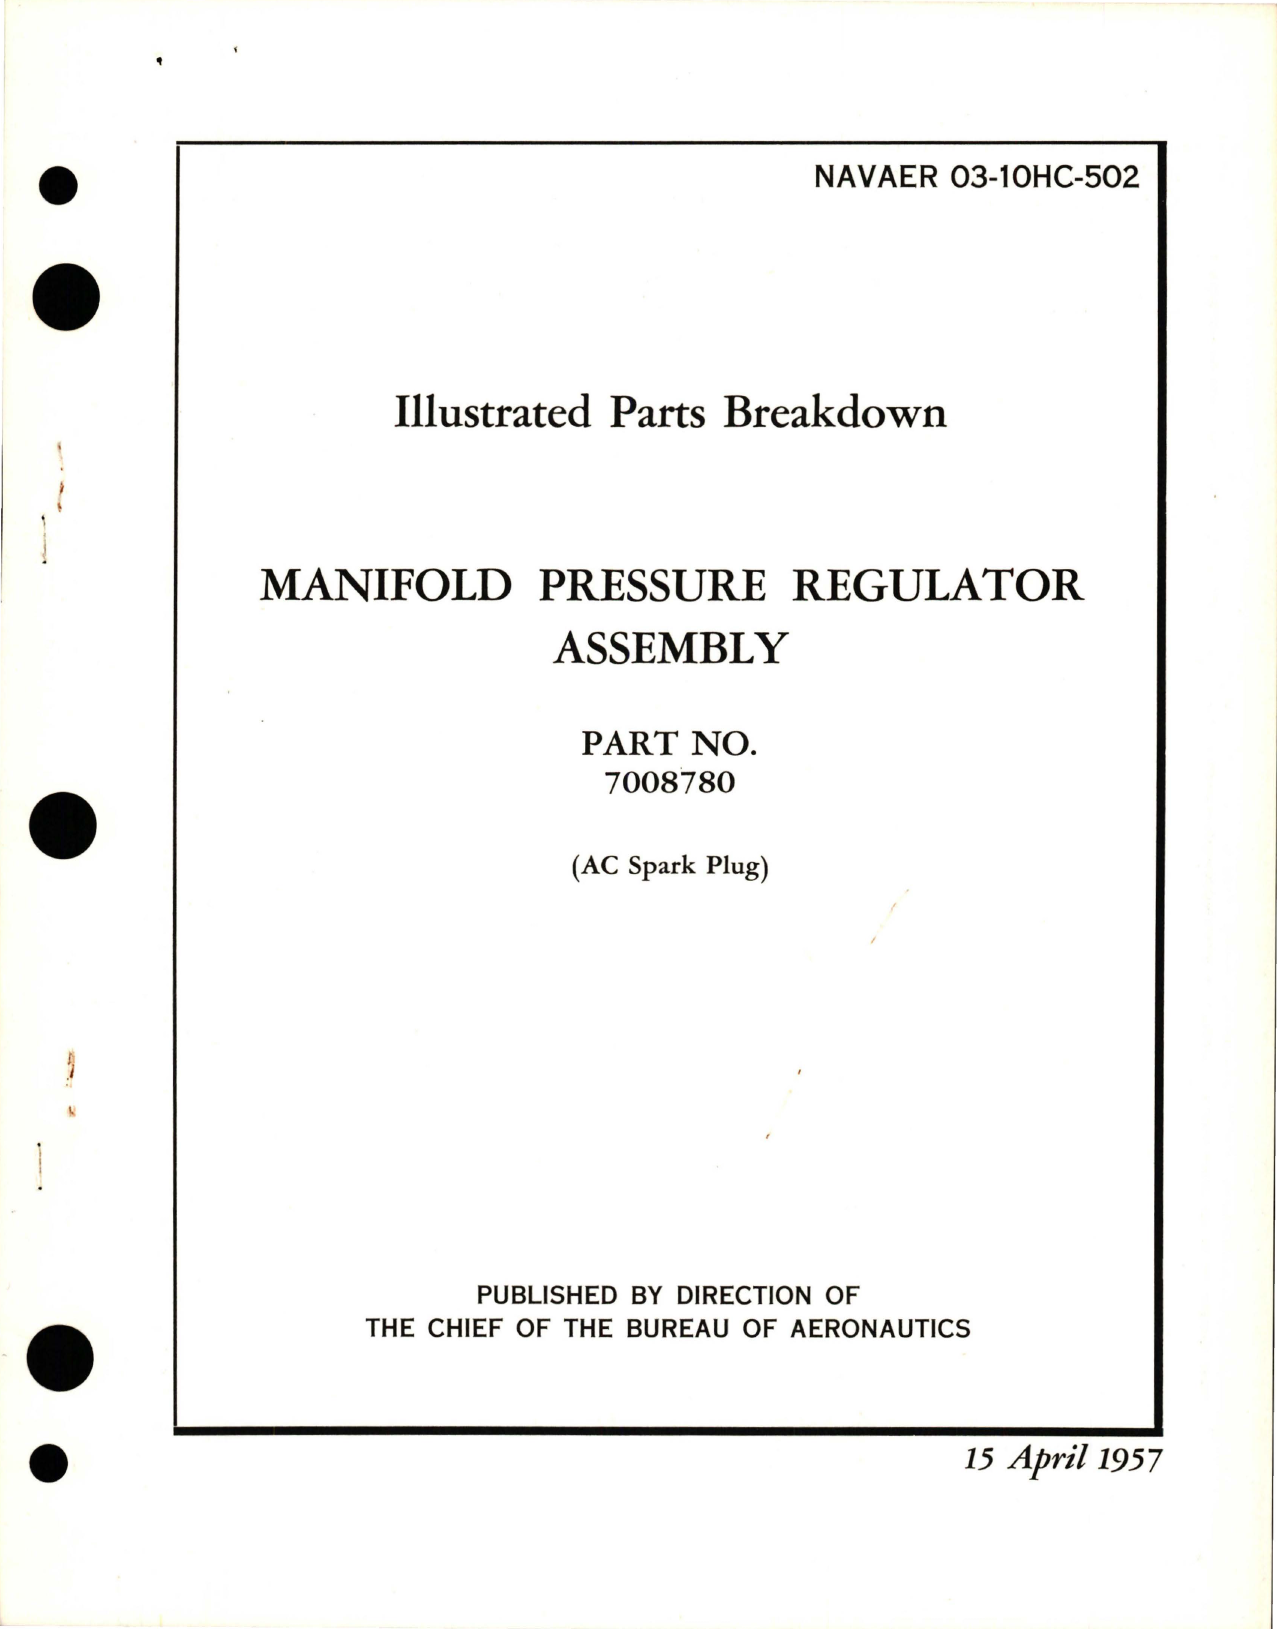 Sample page 1 from AirCorps Library document: Illustrated Parts Breakdown for Manifold Pressure Regulator Assembly - Part 7008780 